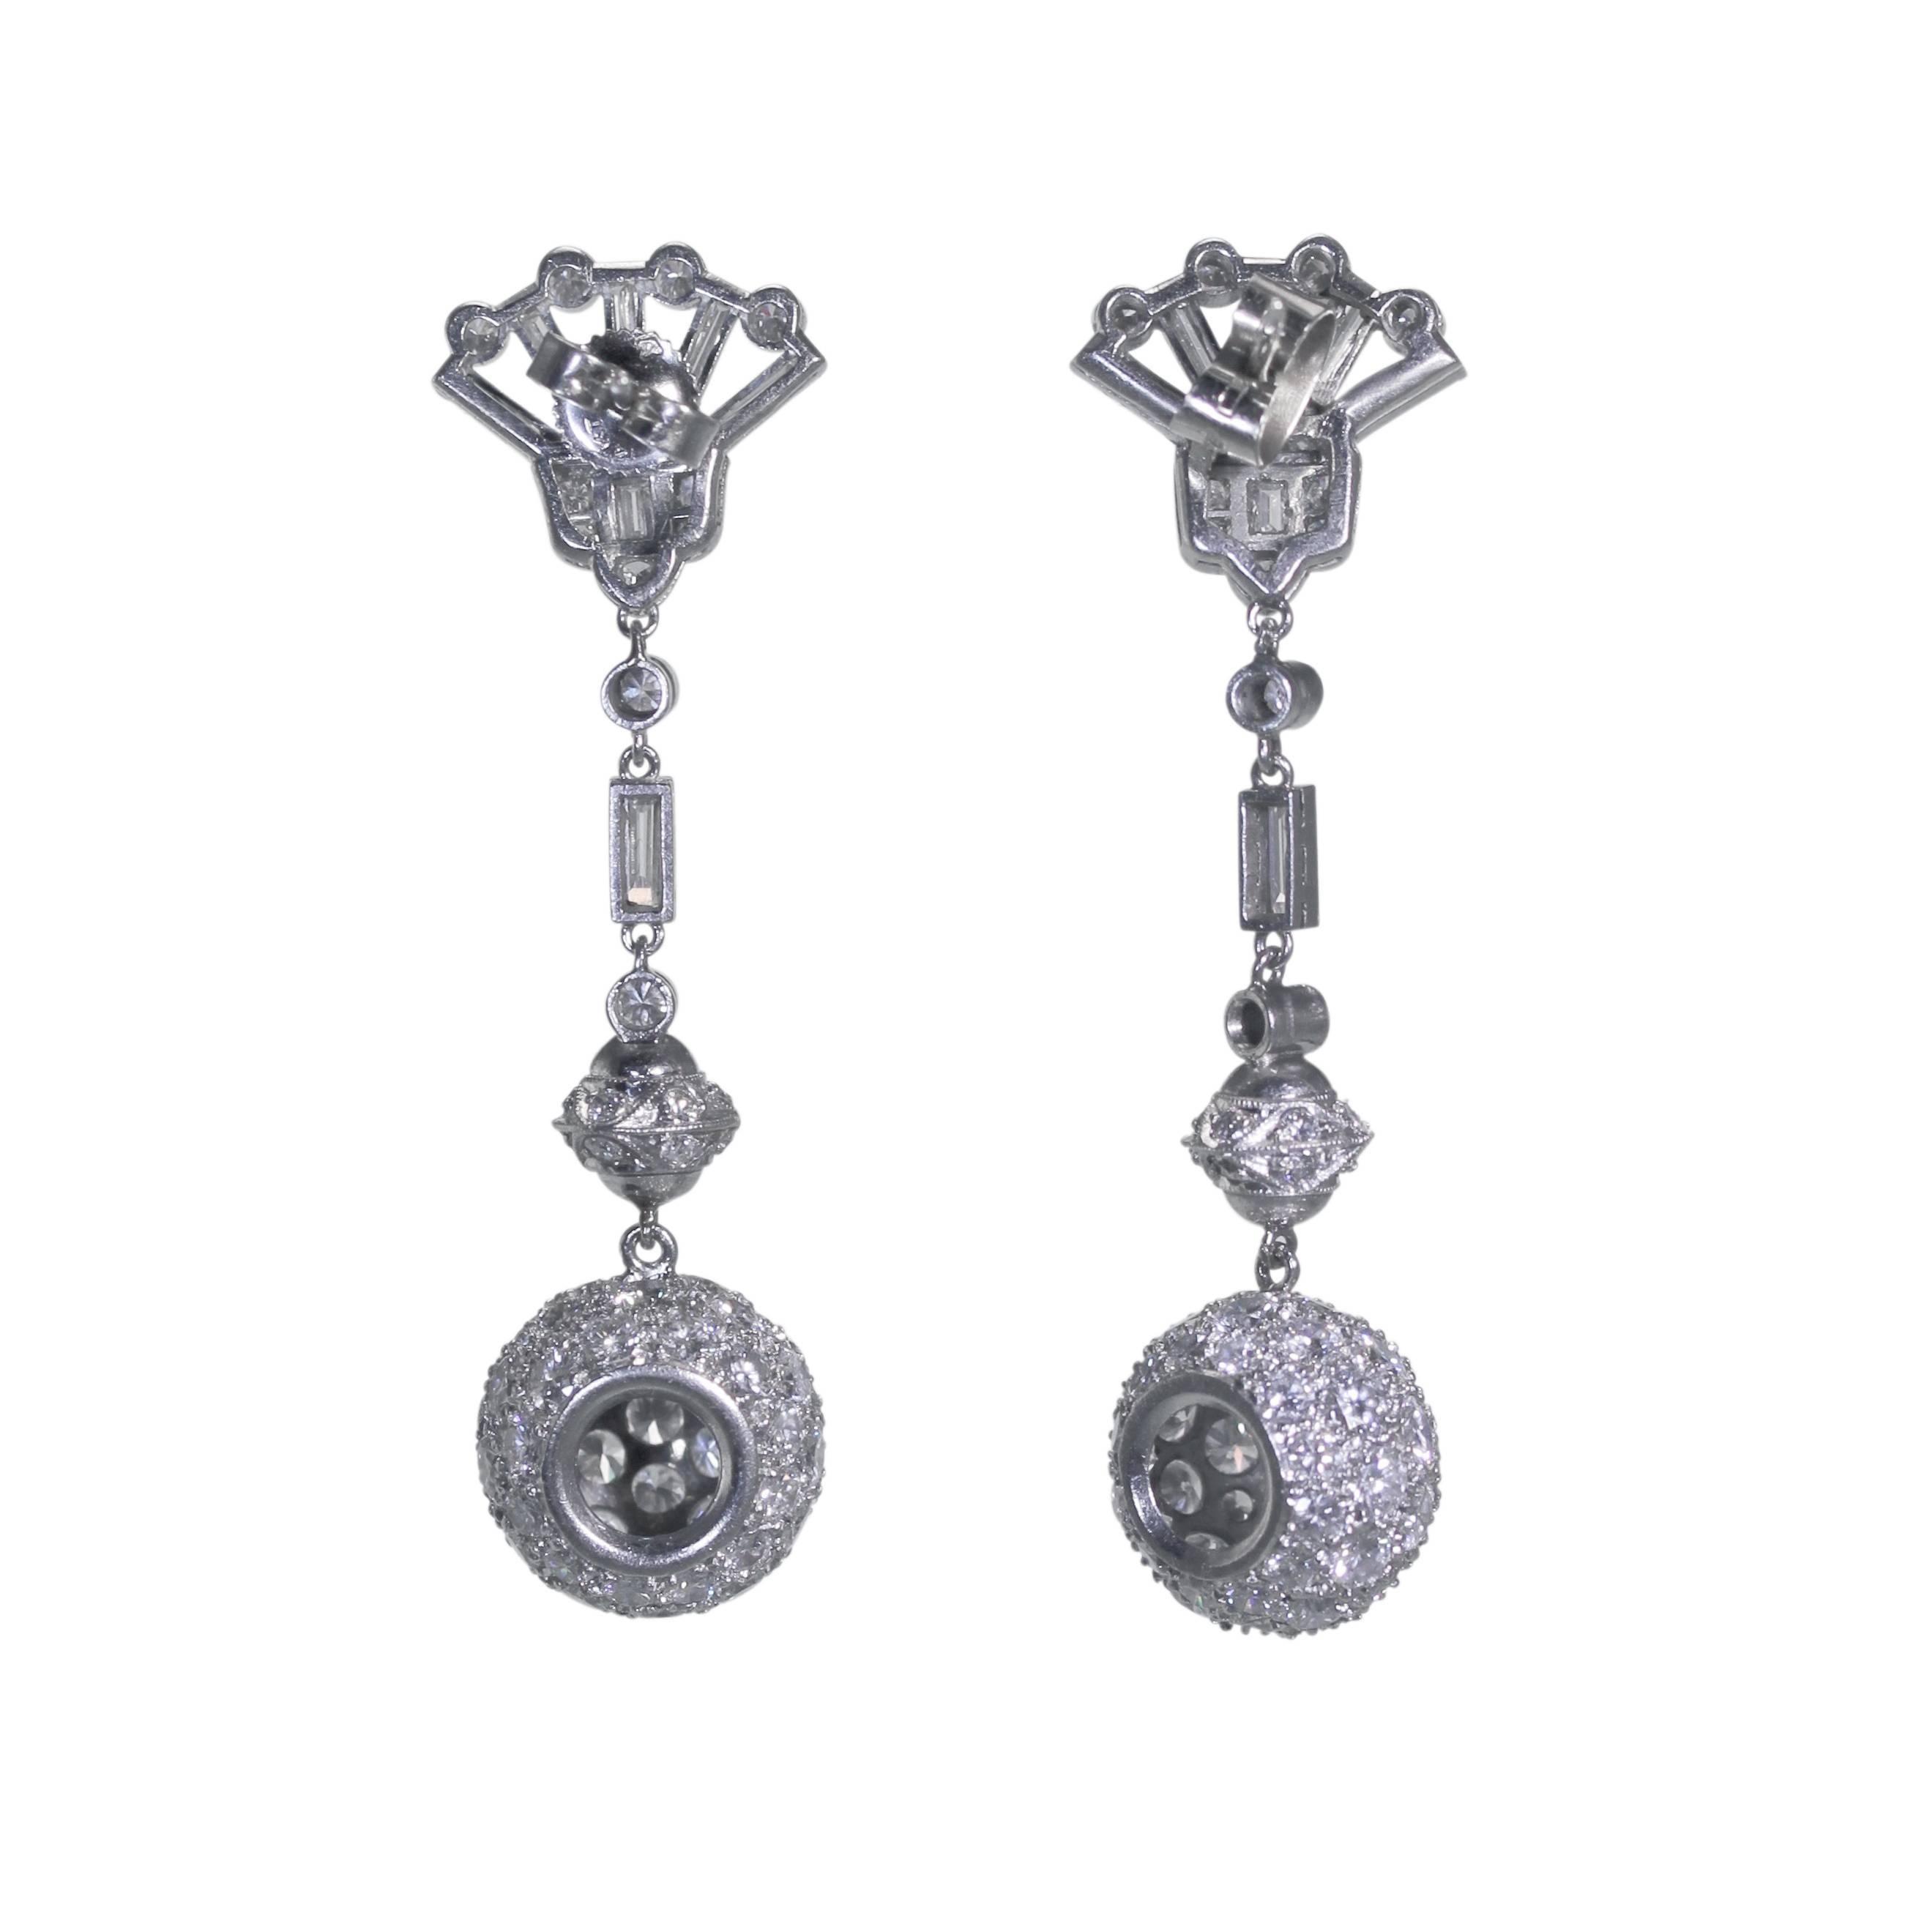 A pair of platinum and diamond pendant earrings, circa 1950, supporting spherical drops surmounted by multiple sections completed by fan-shaped tops, set throughout with 160 round diamonds weighing approximately 4.50 carats, accented by 14 baguette